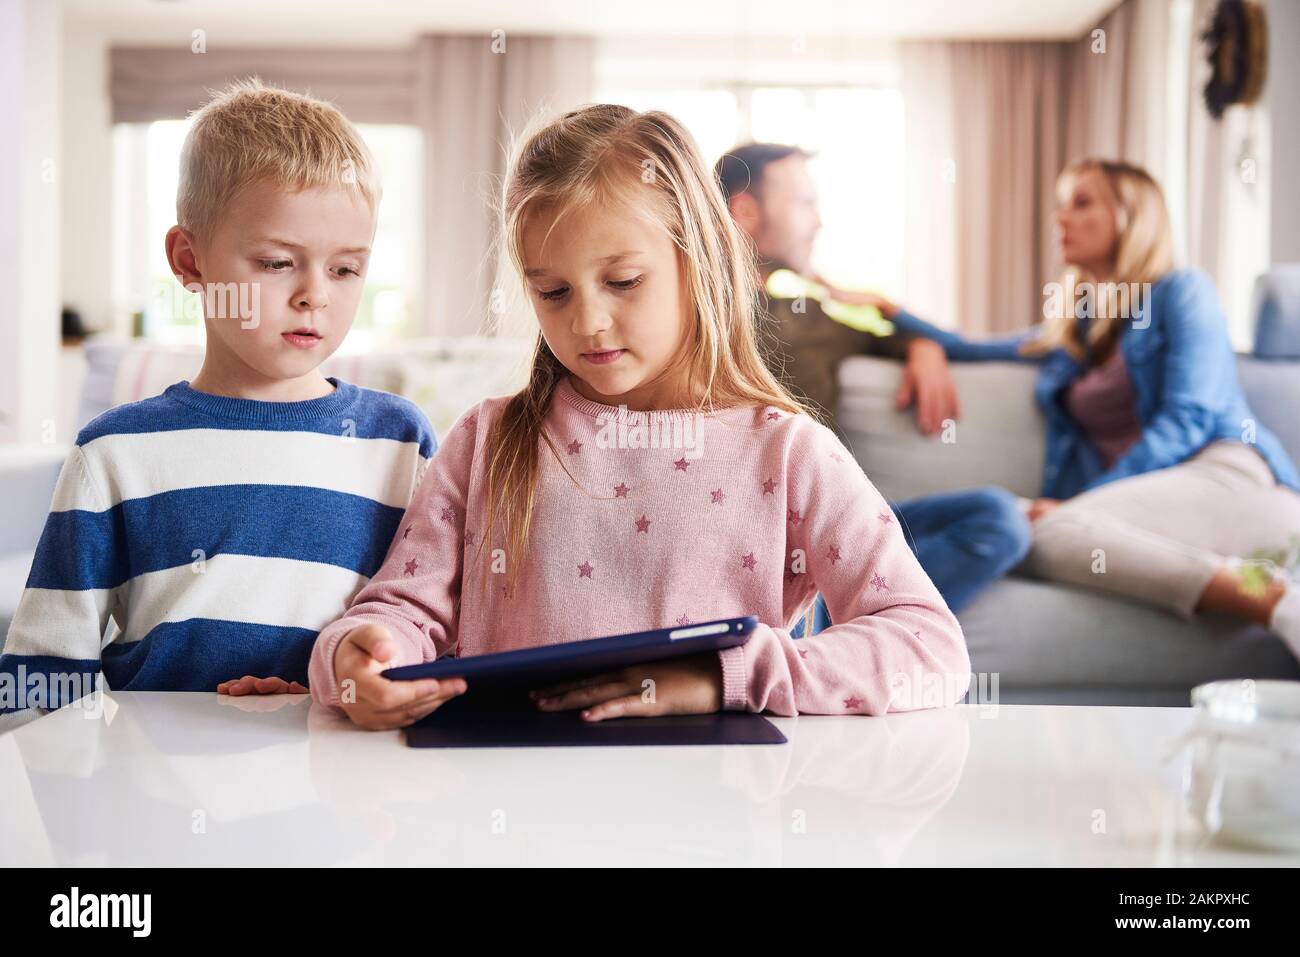 Focused children using technology and parents in the background Stock Photo